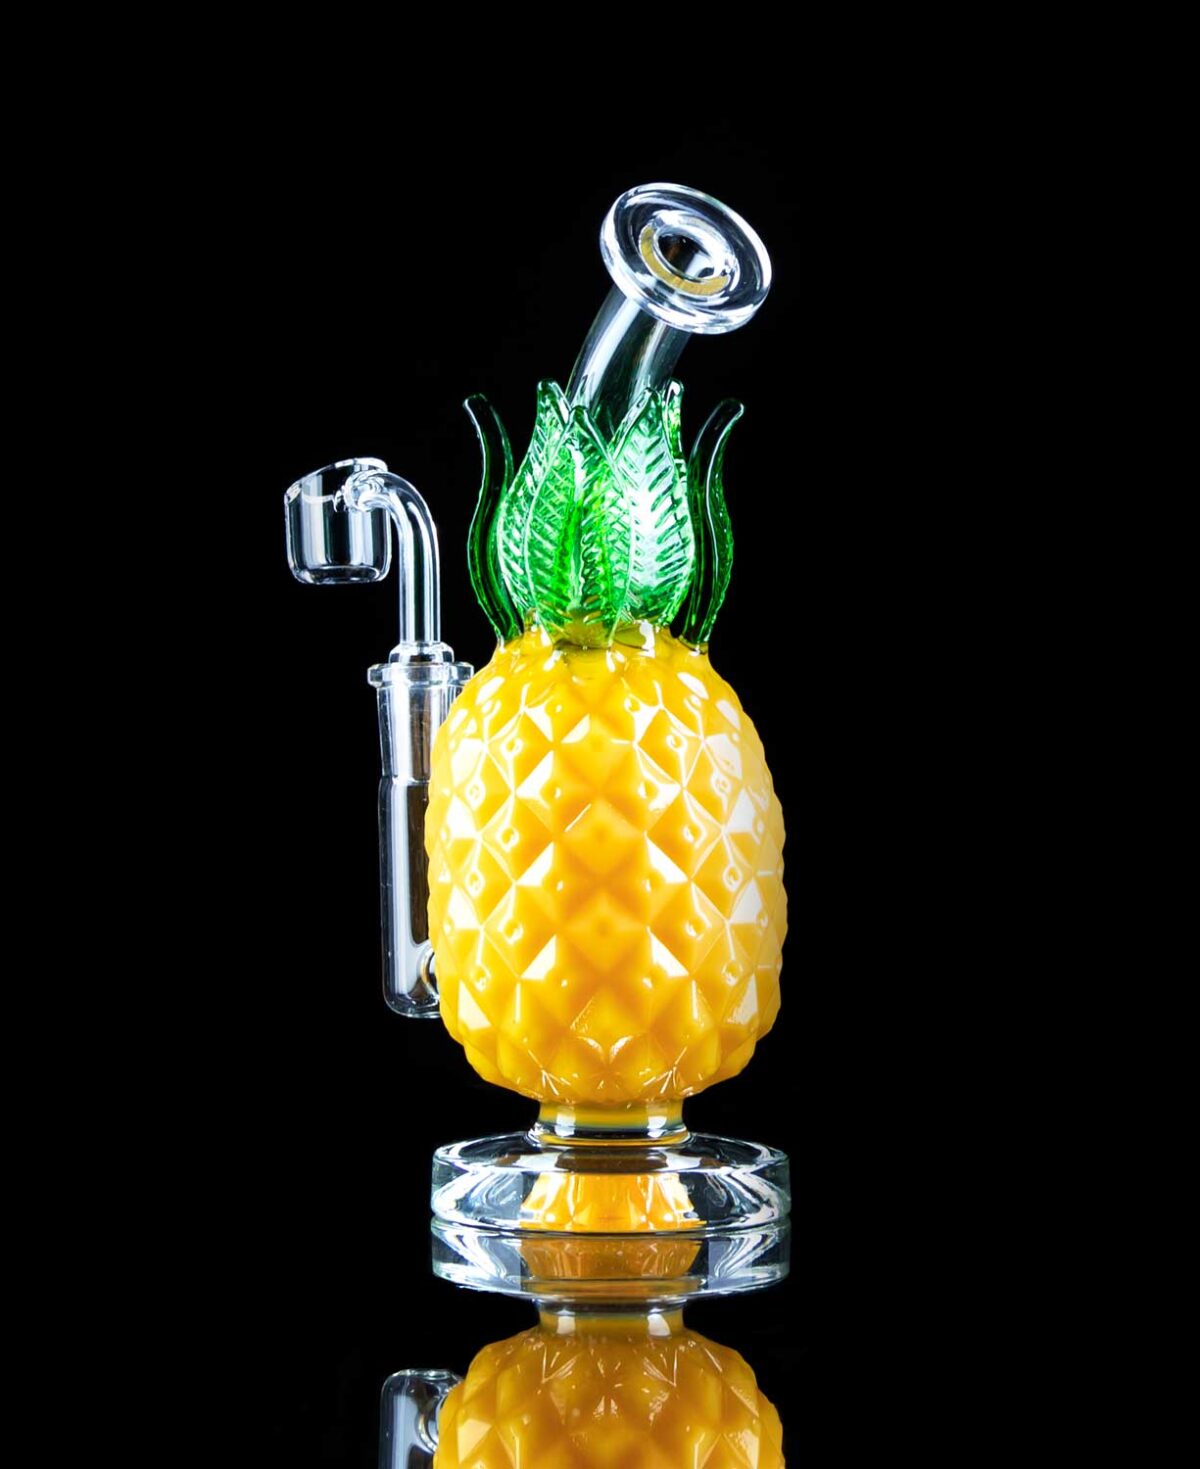 pineapple dab rig made from textured glass